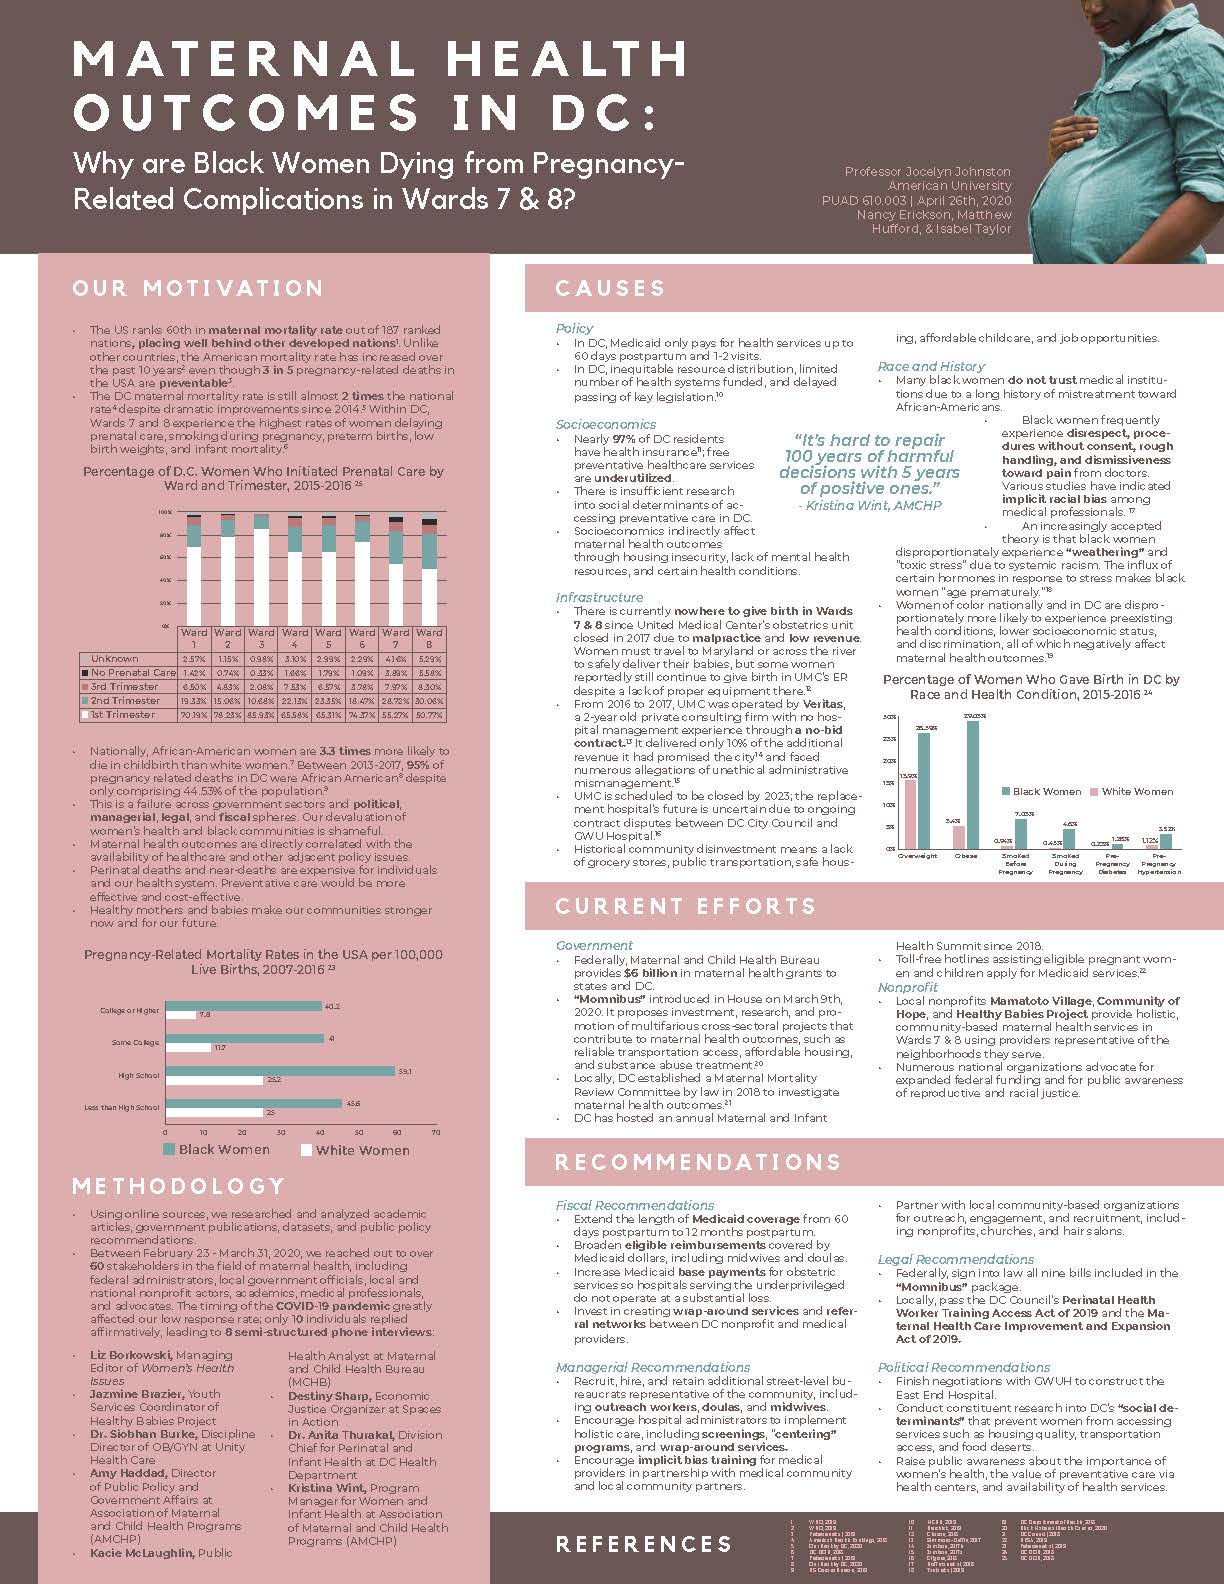 Student Poster for Maternal Mortality in DC project